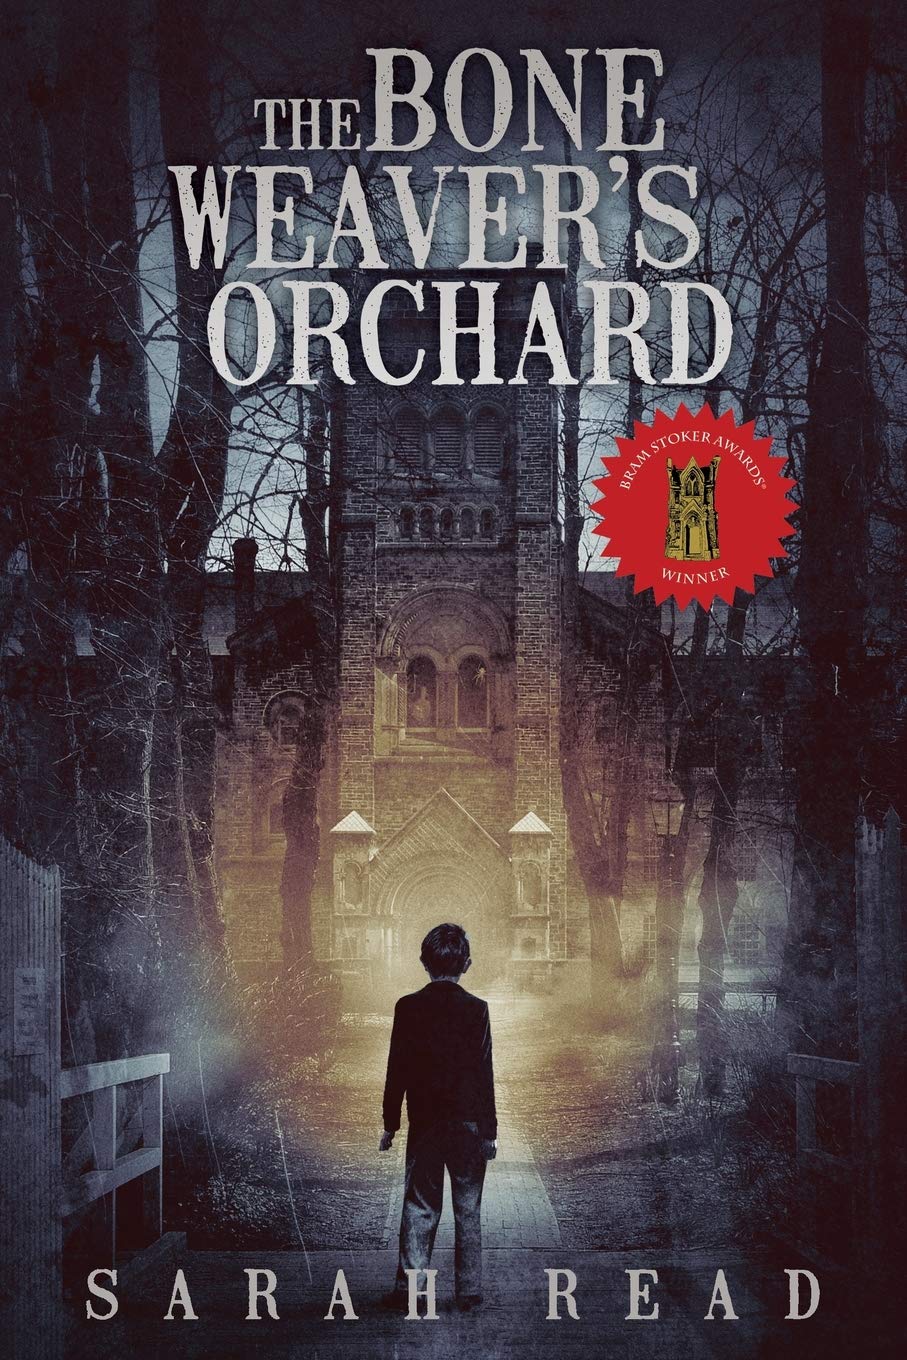 The cover of The Bone Weaver's Orchard by Sarah Read